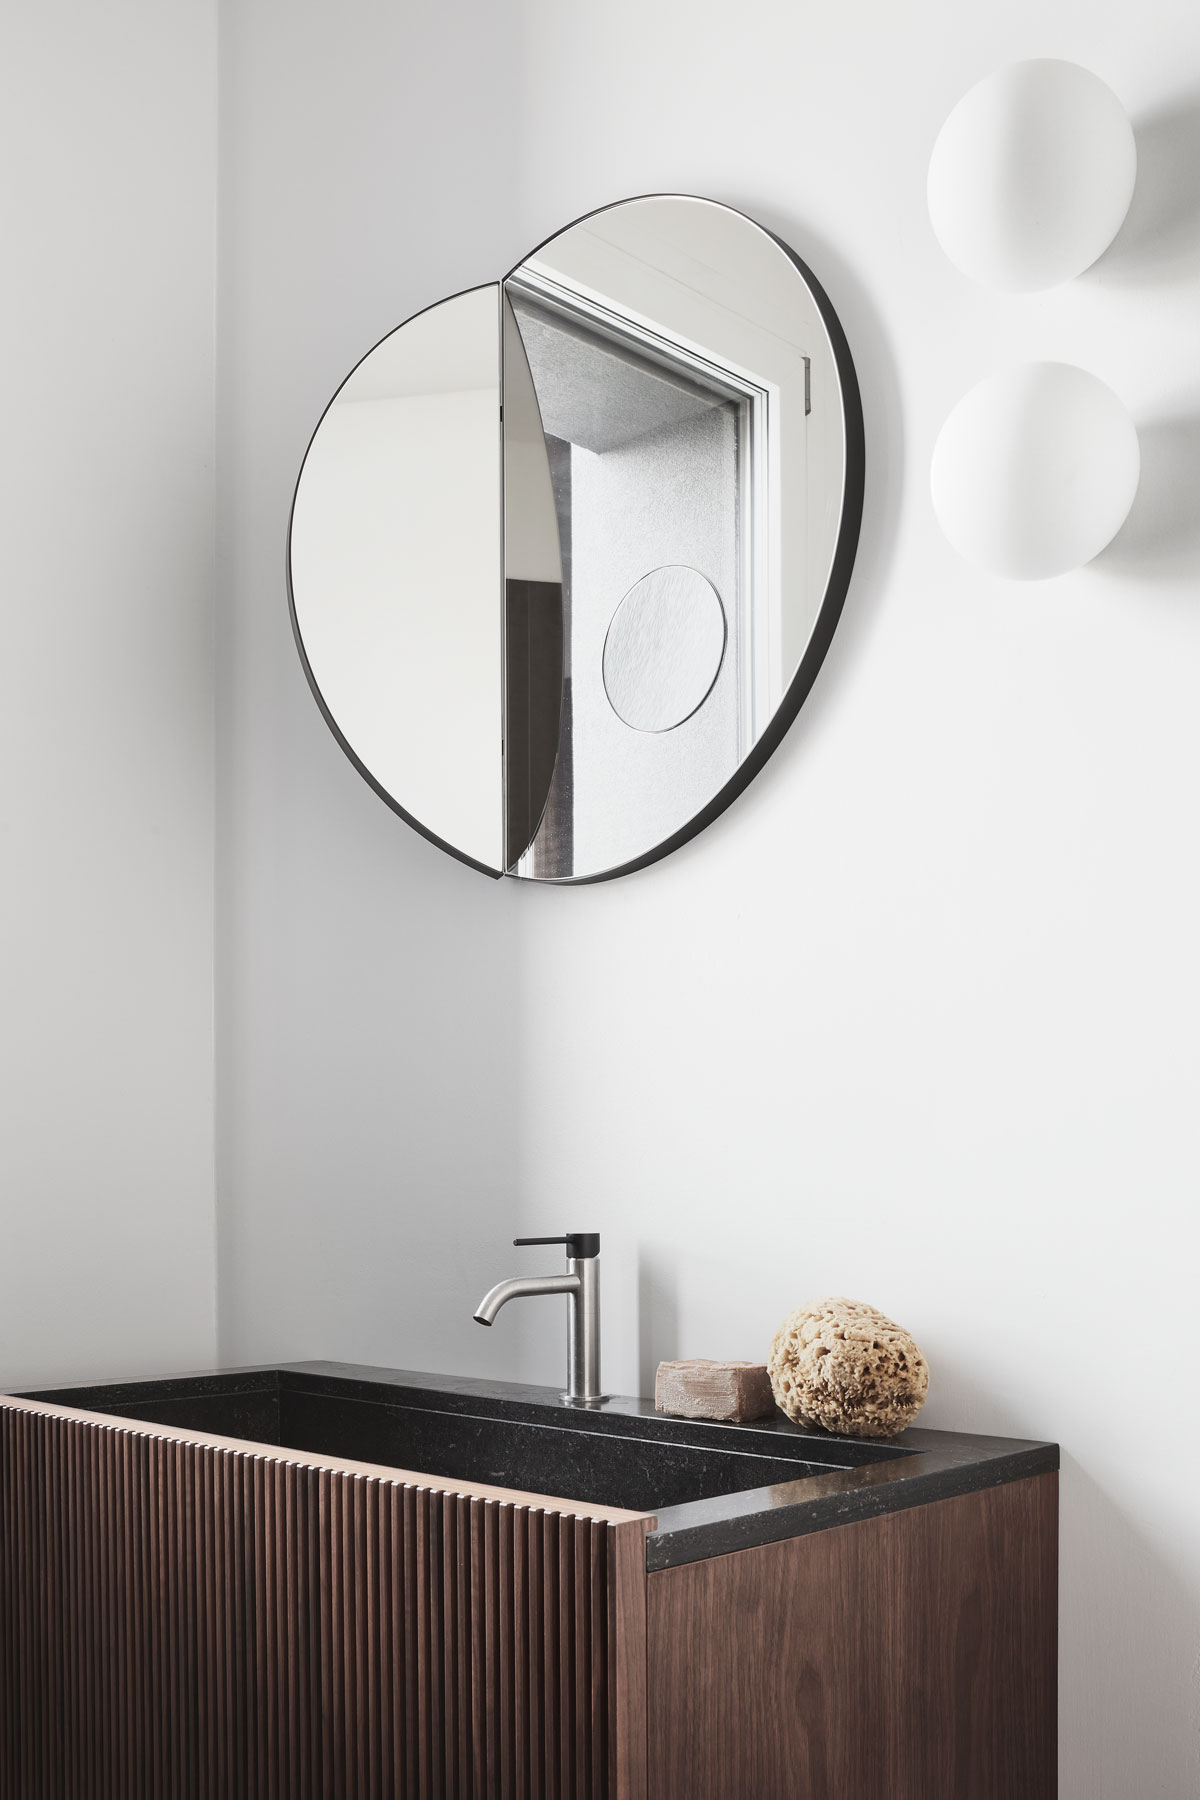 japanese-style washbasins made by natural stone and walnut wood with a circle mirror and accessories